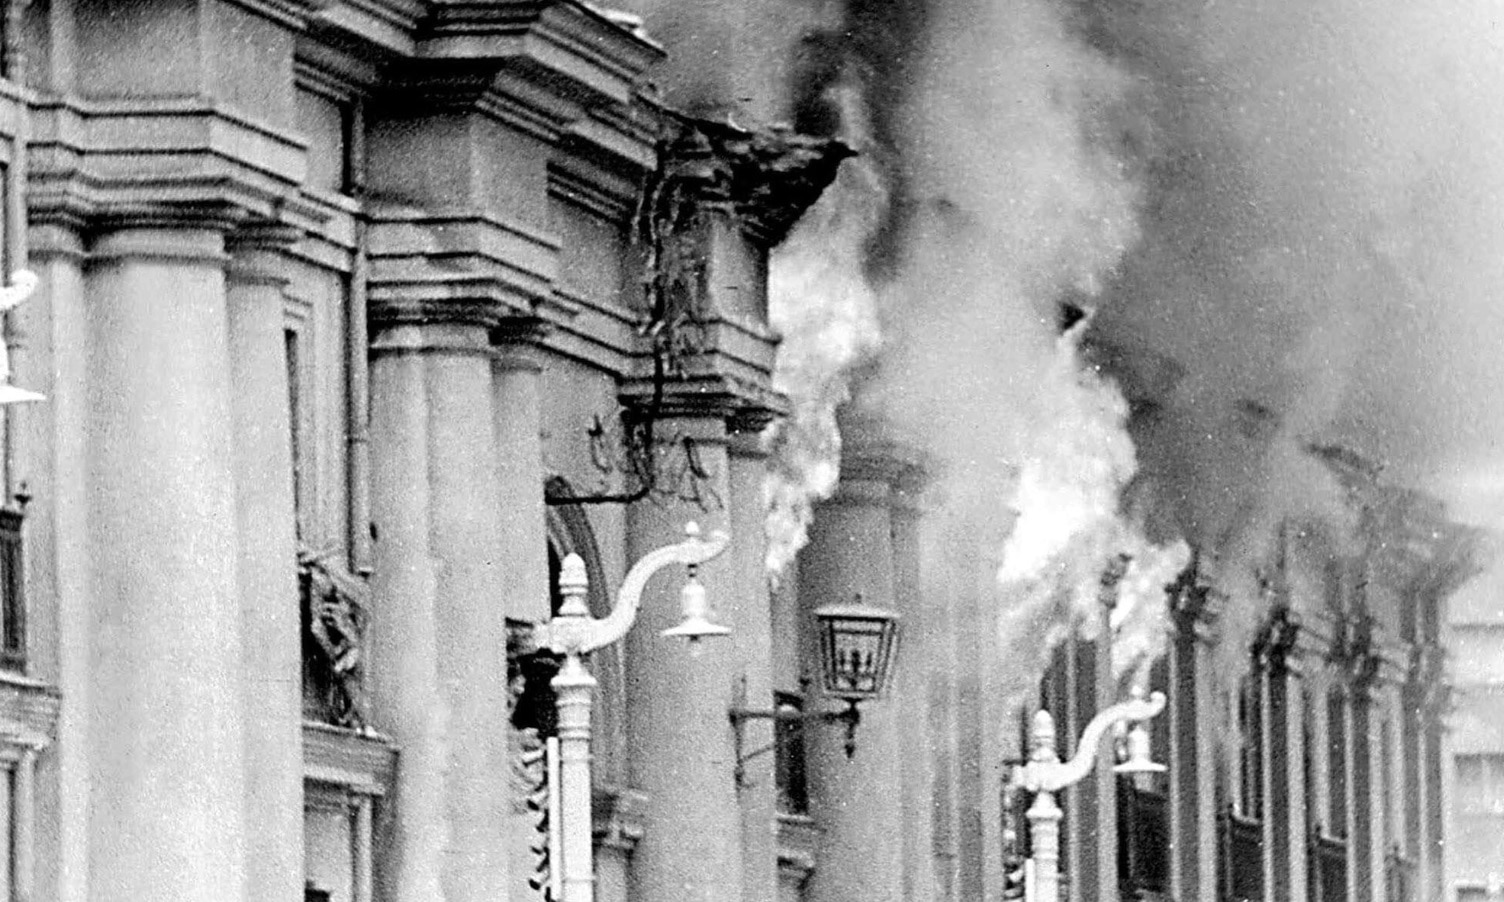 Smoke pours from the Chilean presidential palace, La Moneda, in this Sept. 11, 1973, file photo, after being hit by rockets fired by the air force Hawker Hunter jet fighters